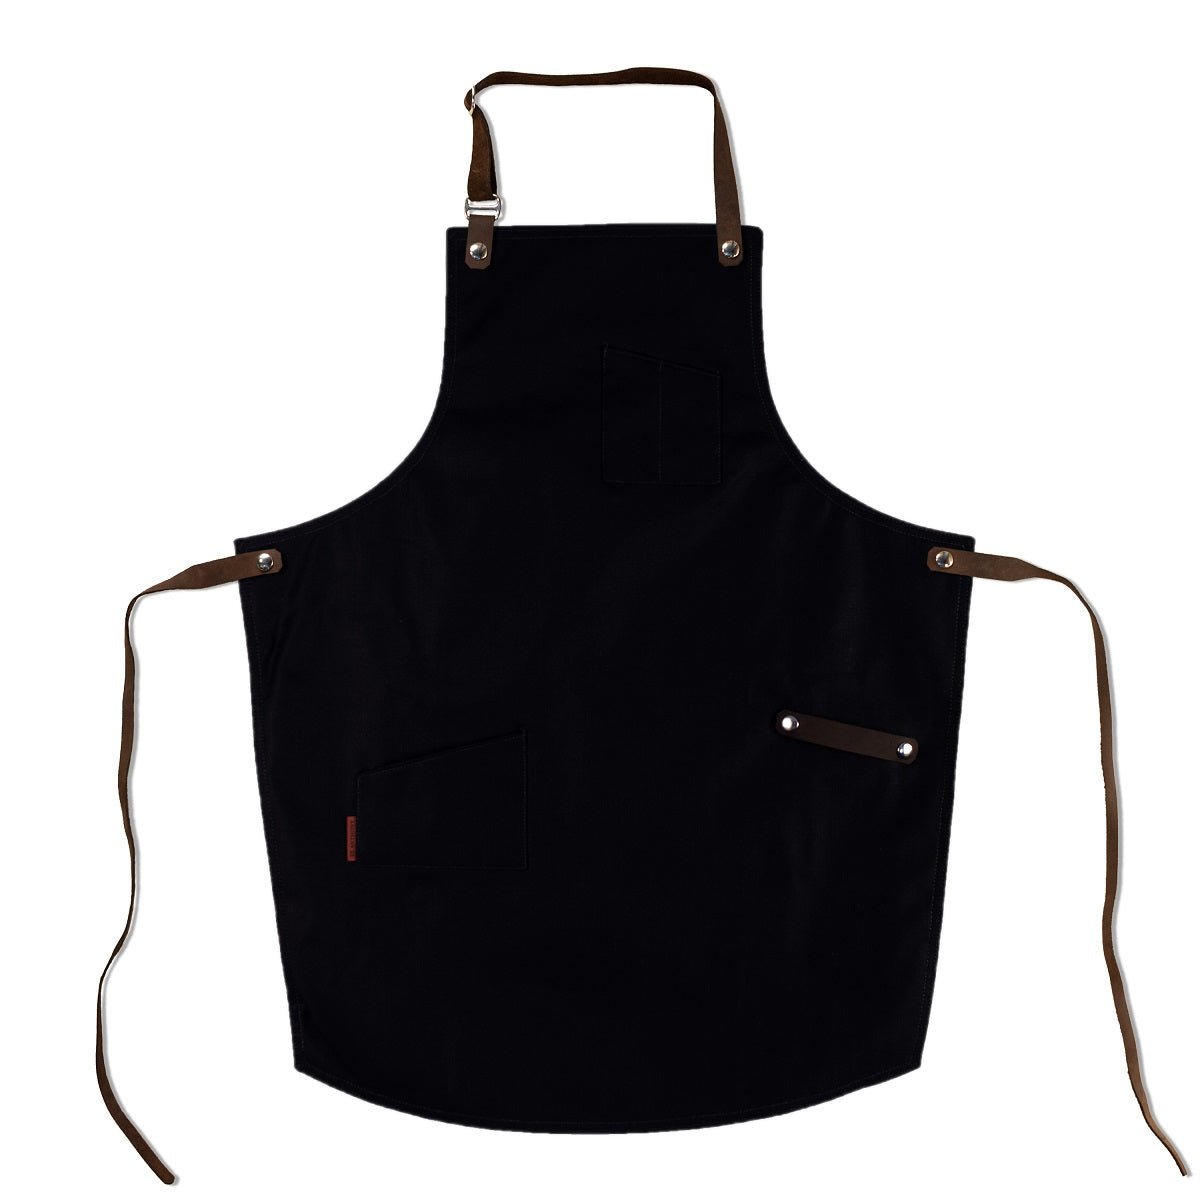 Limited Run - Sergeant Aprons - Saint Anthony Industries